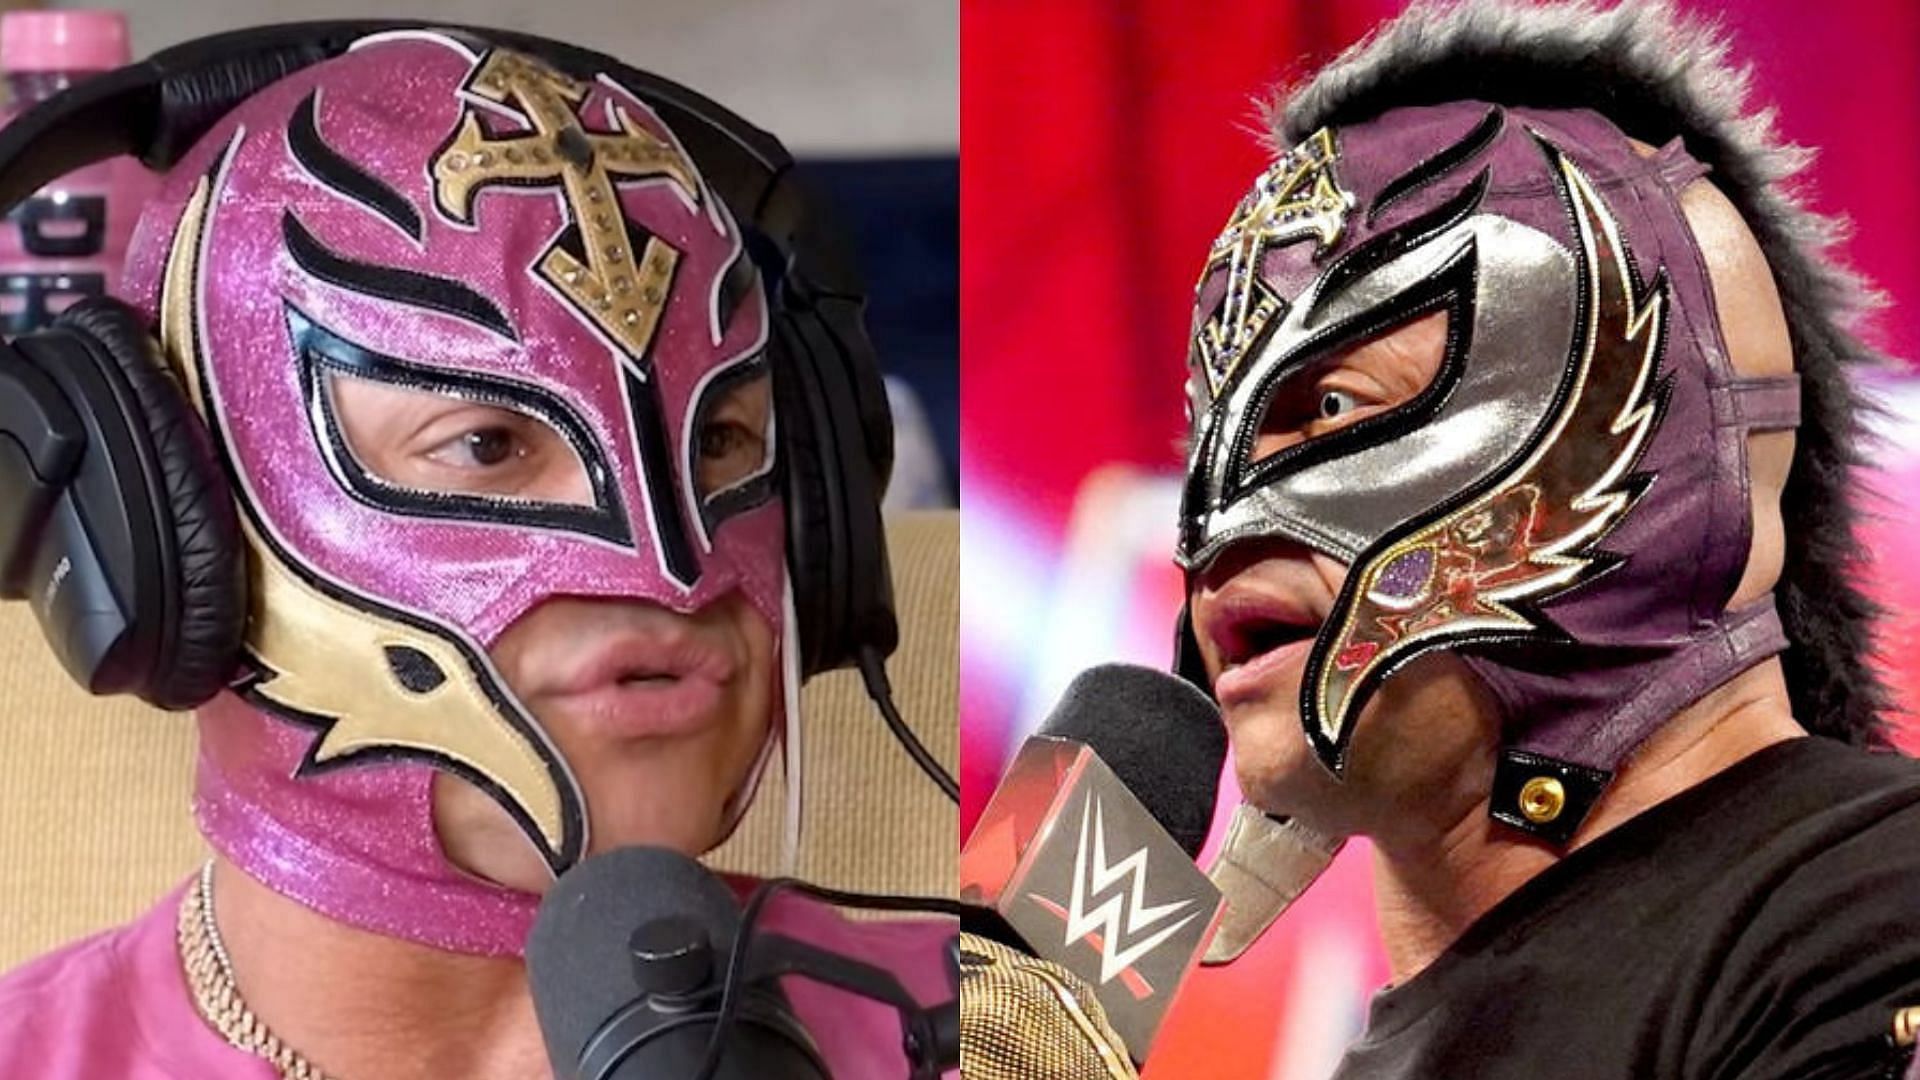 Rey Mysterio is a former world champion